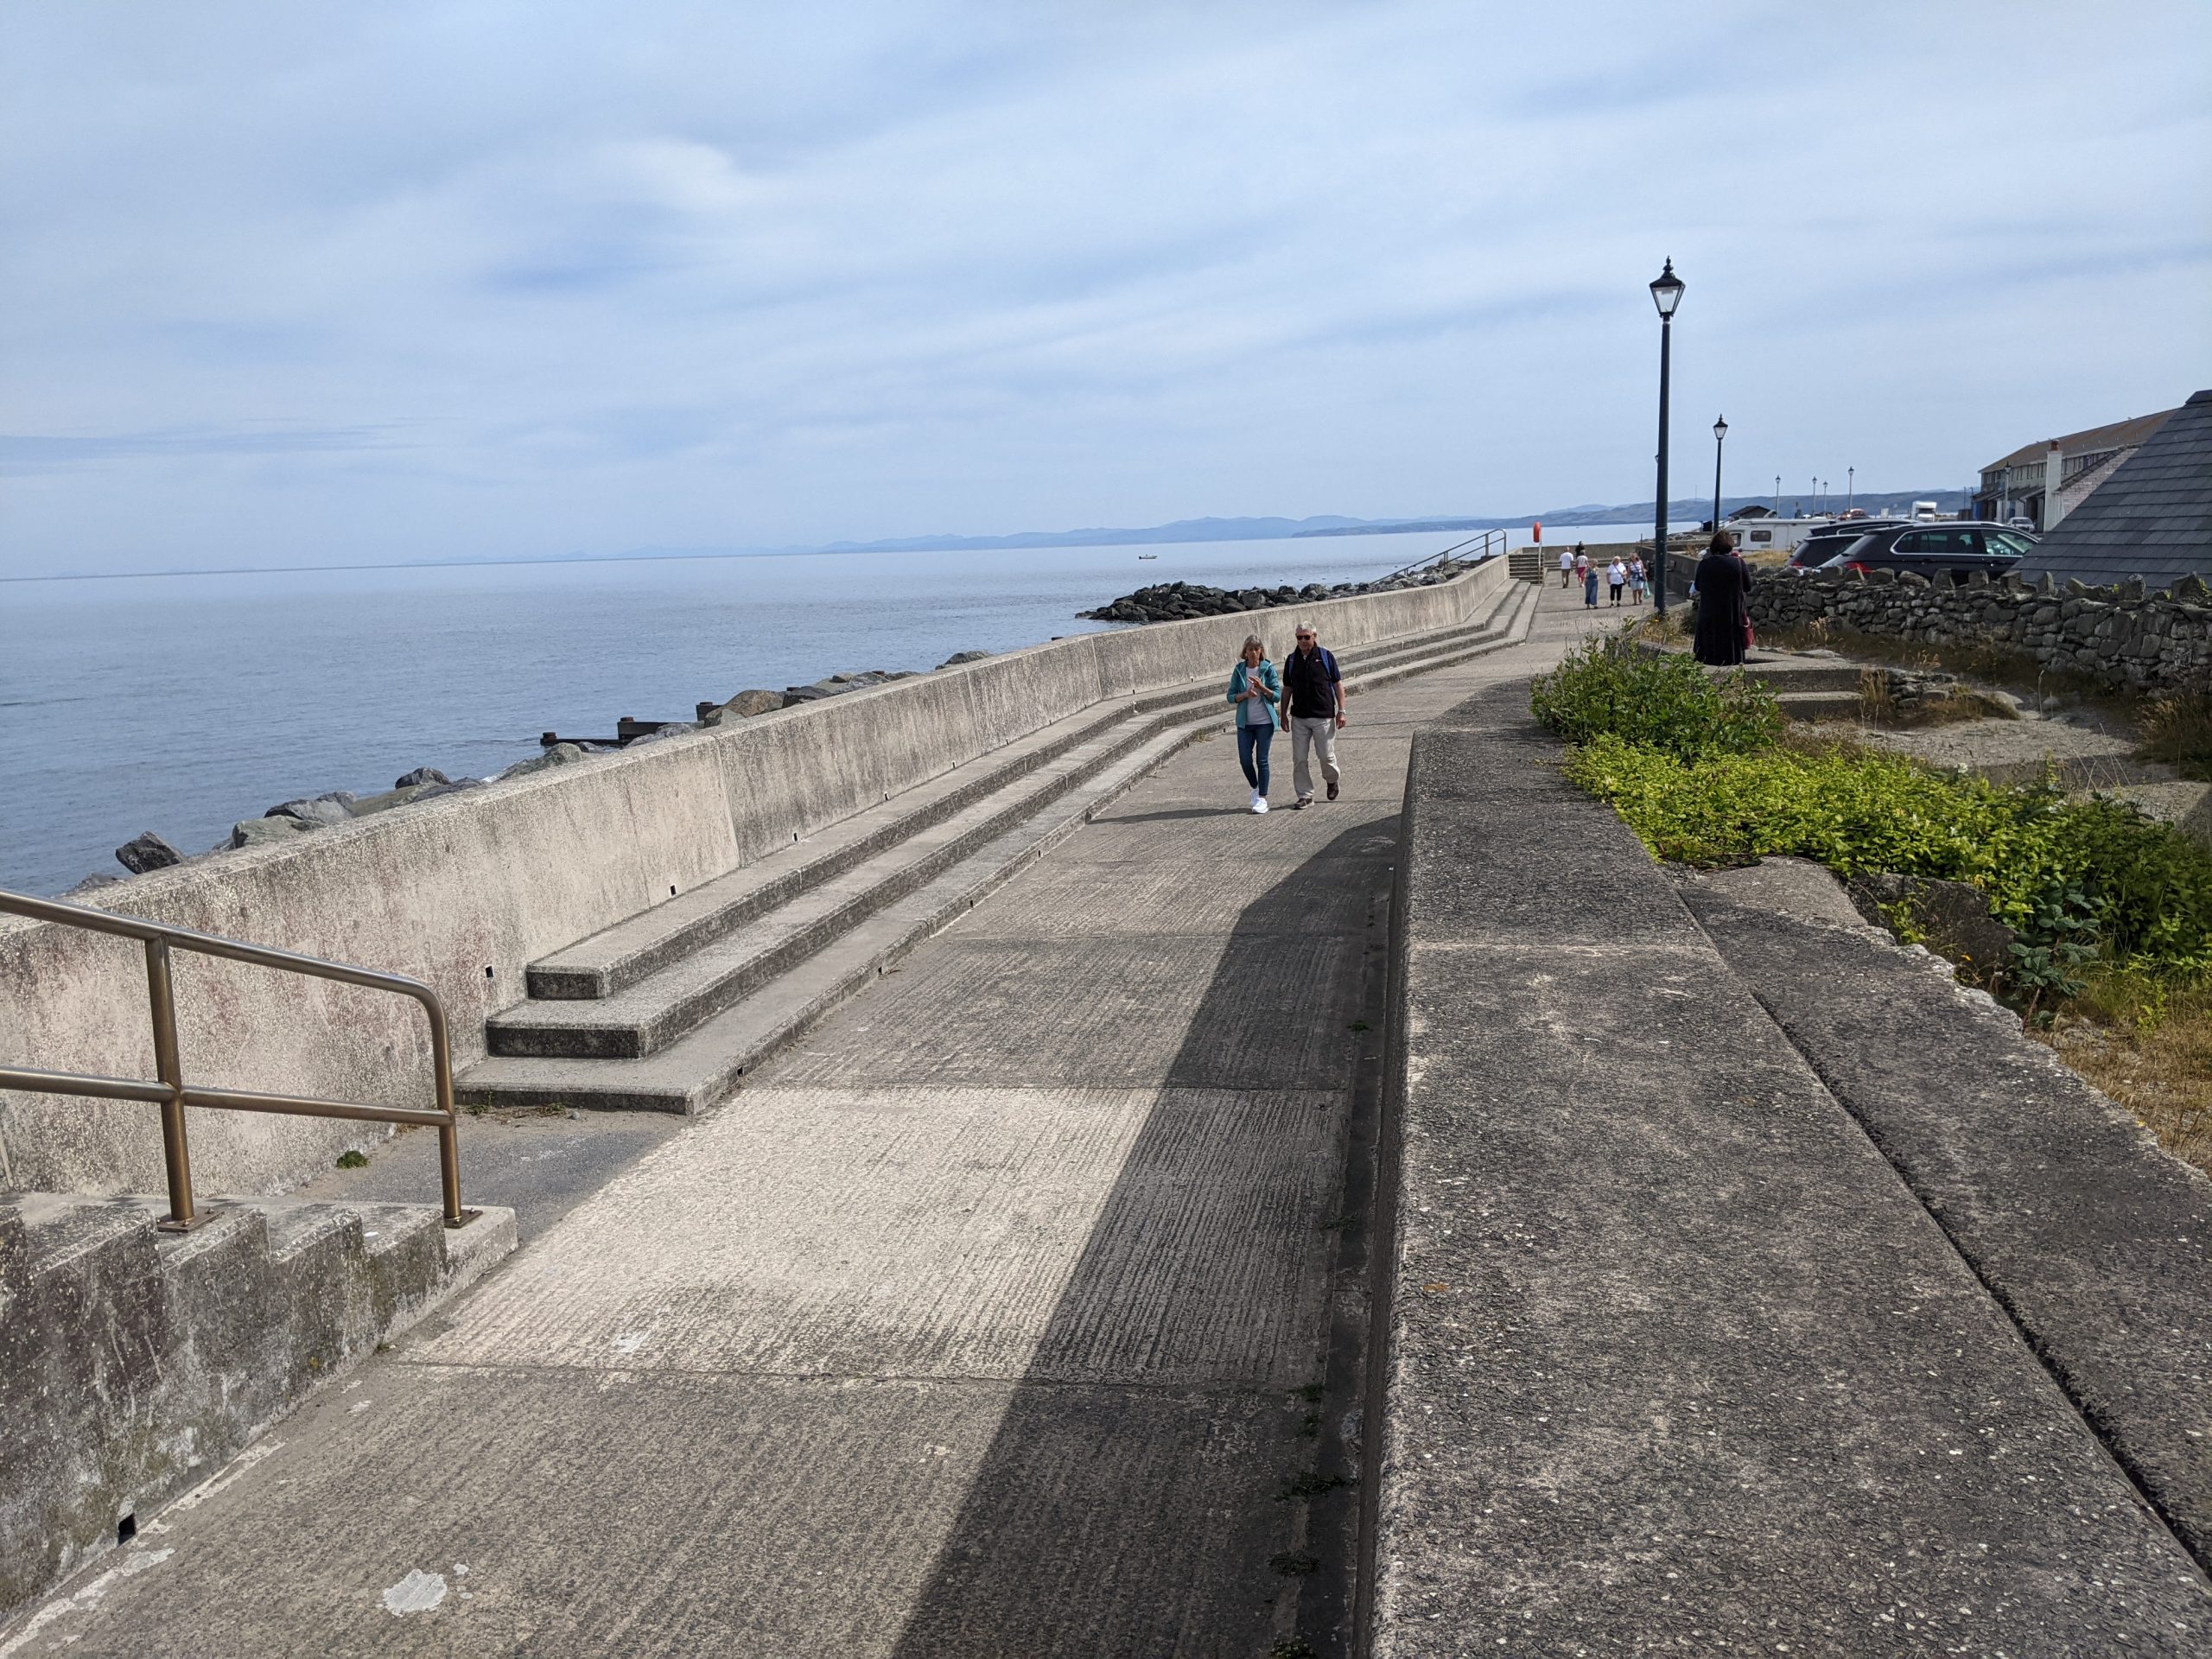 Concrete seafront promenade with lampposts, cars in the background and people walking along it.